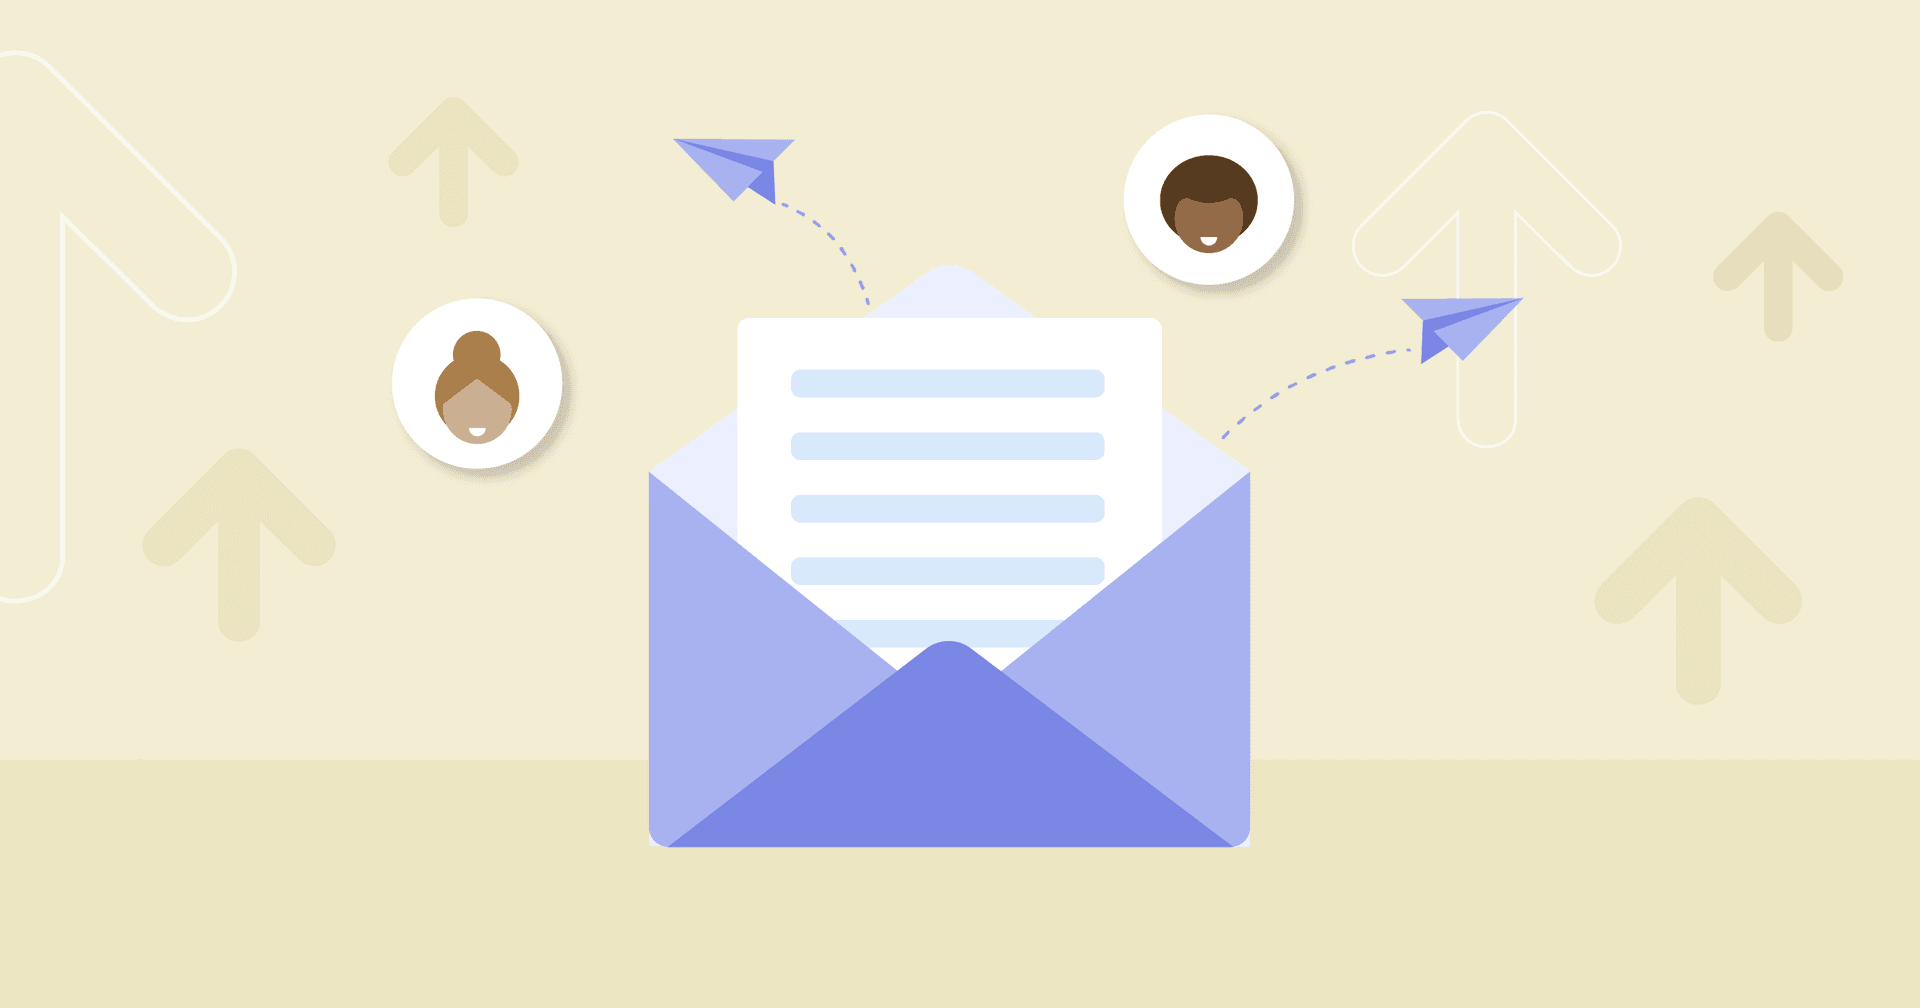 5 Ways to Build an Email Newsletter and Grow Your Audience